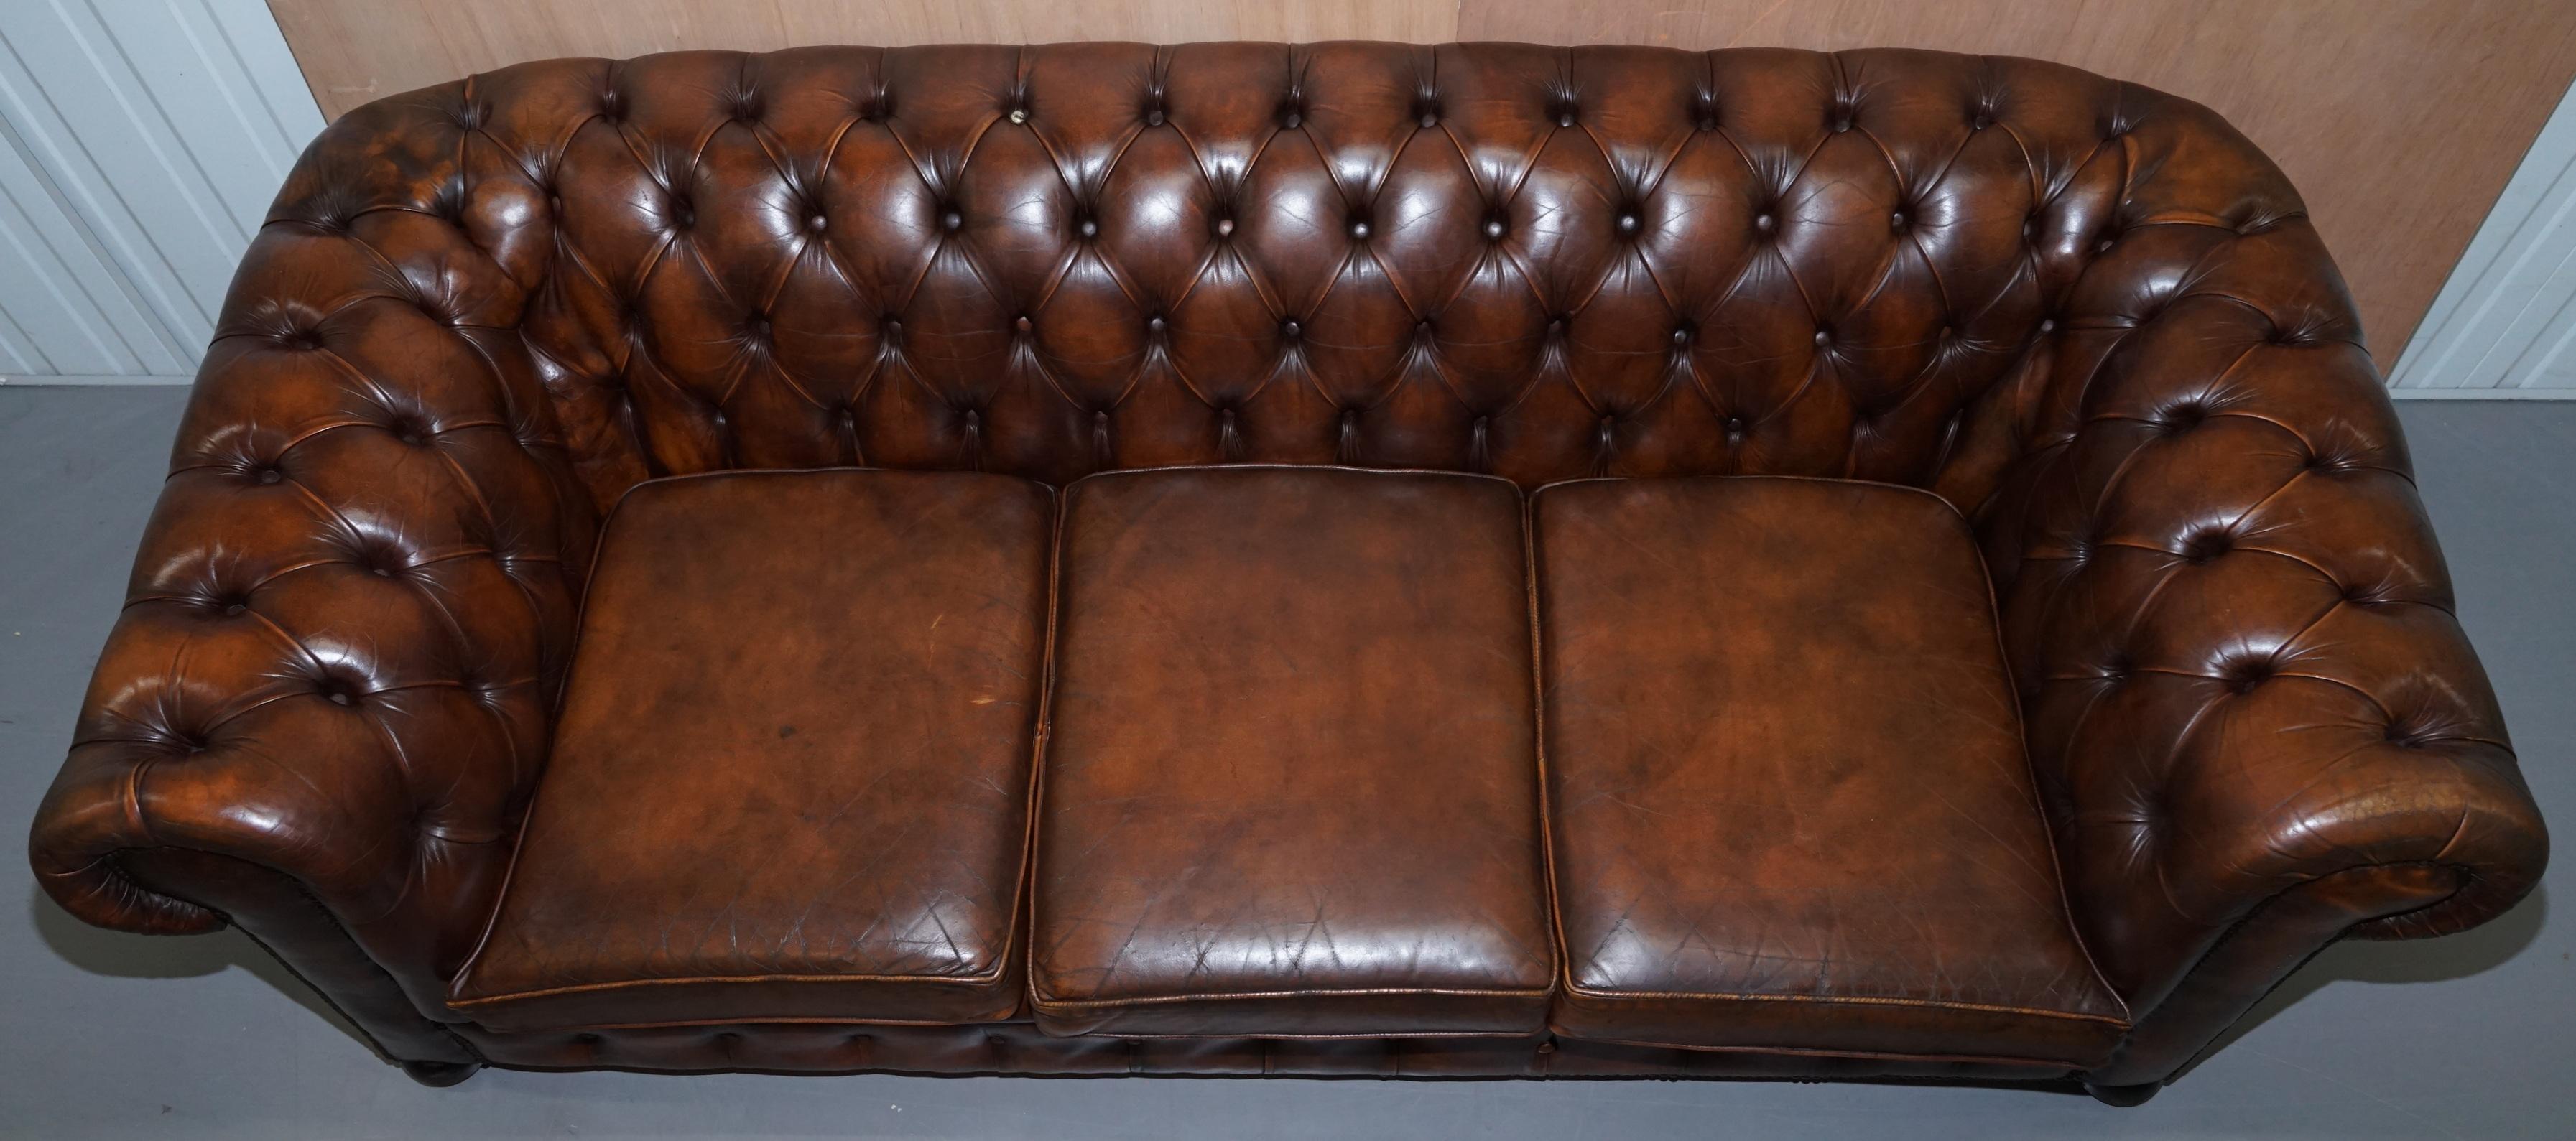 English Vintage Art Deco 1920s Brown Leather Hand Dyed Coil Sprung Chesterfield Sofa